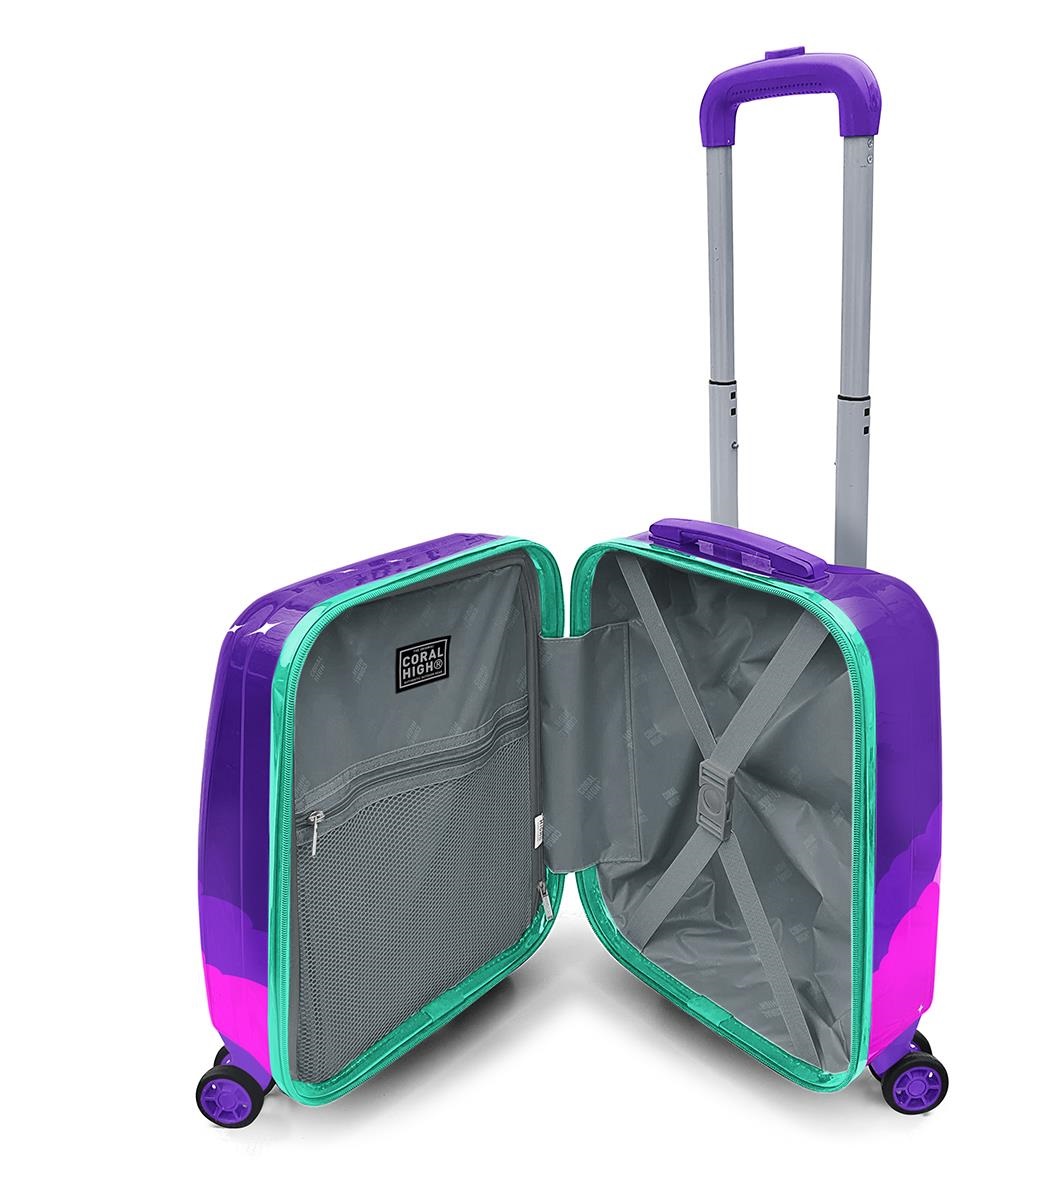 Coral High Kids Luggage suitcase - Purple Water Green Unicorn Patterned